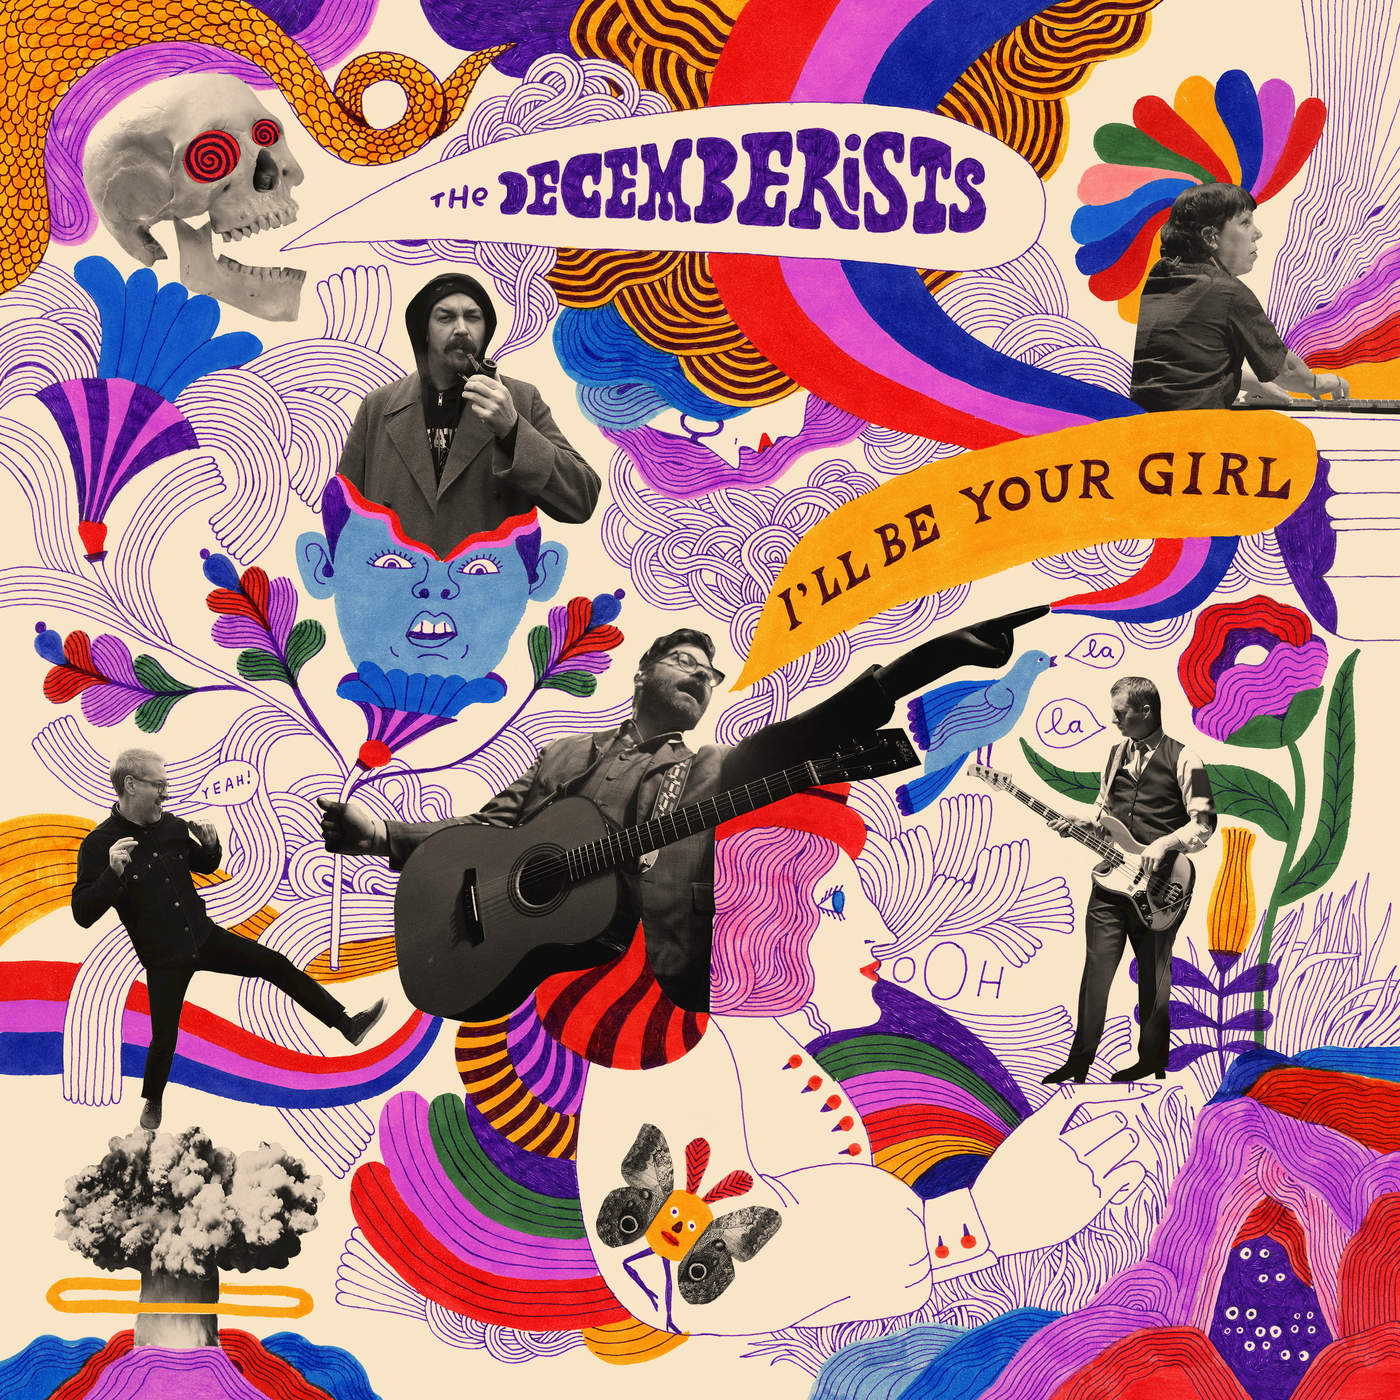 Art for Severed by The Decemberists